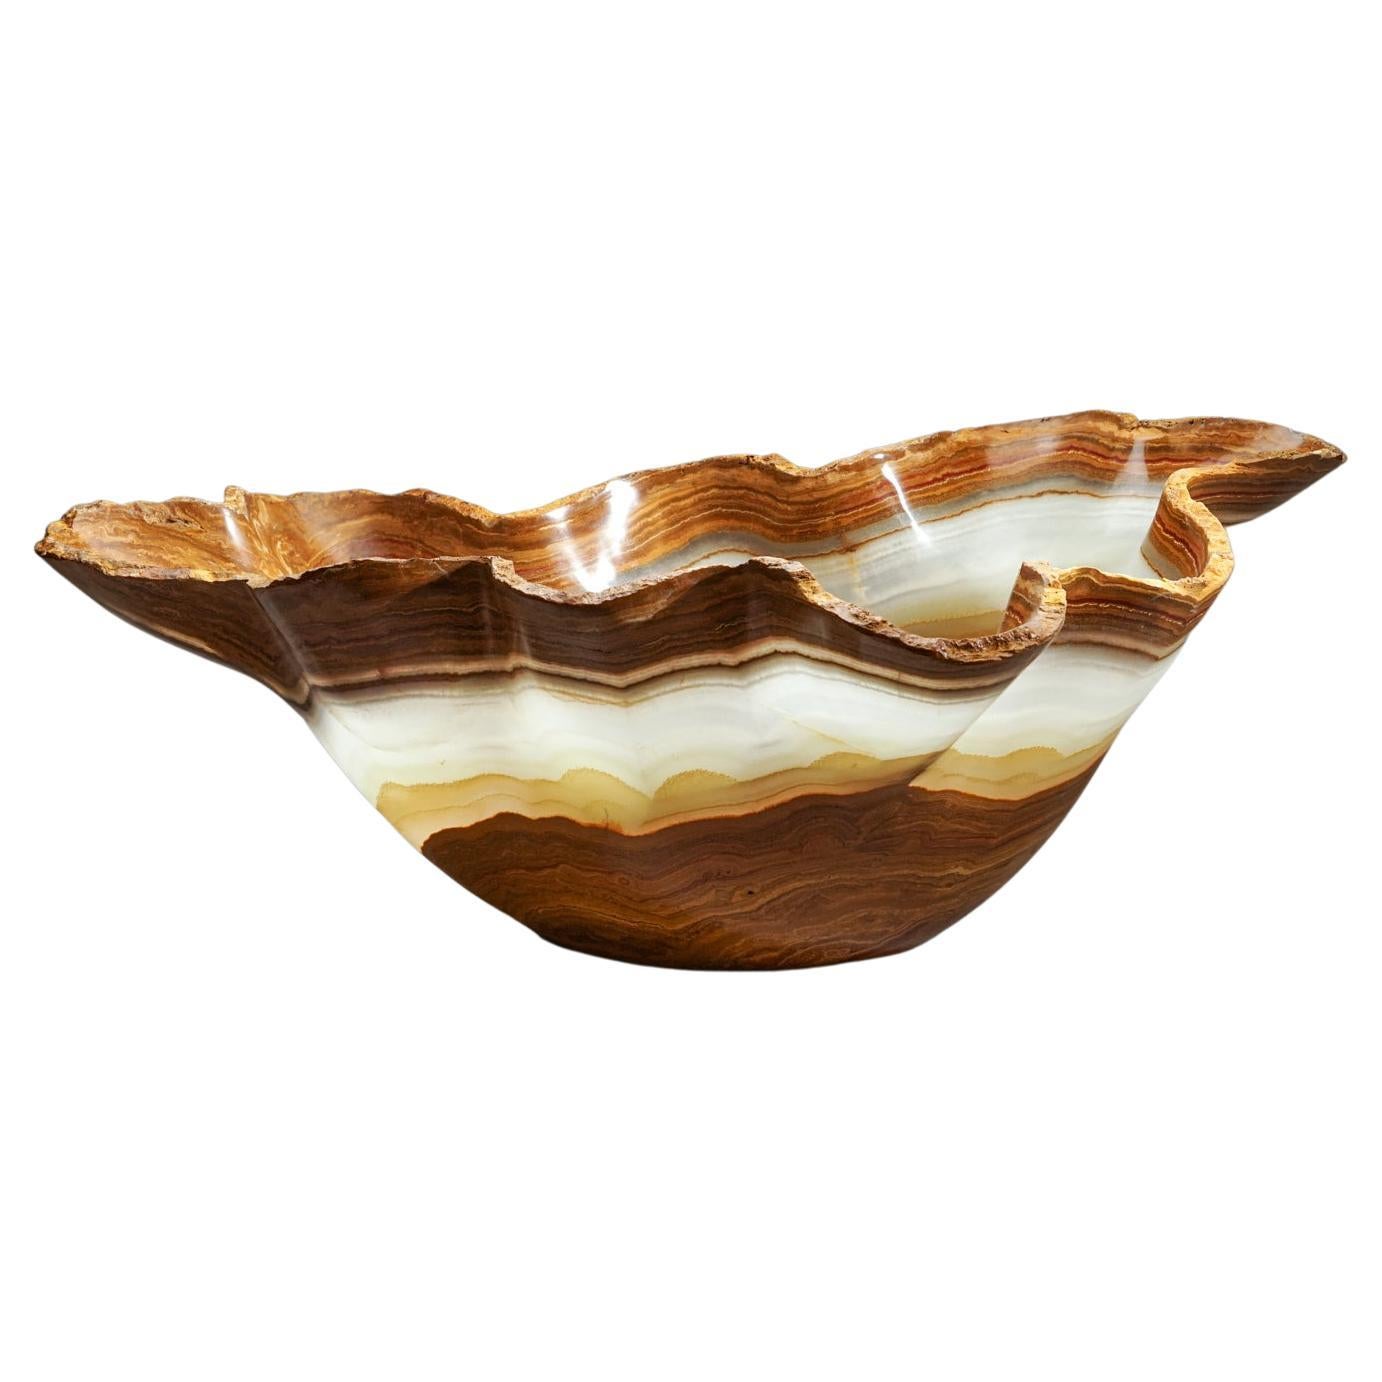 Large Polished Onyx Decorative Bowl from Mexico (29" x 18.5" x 9.5", 30 Lbs.) For Sale